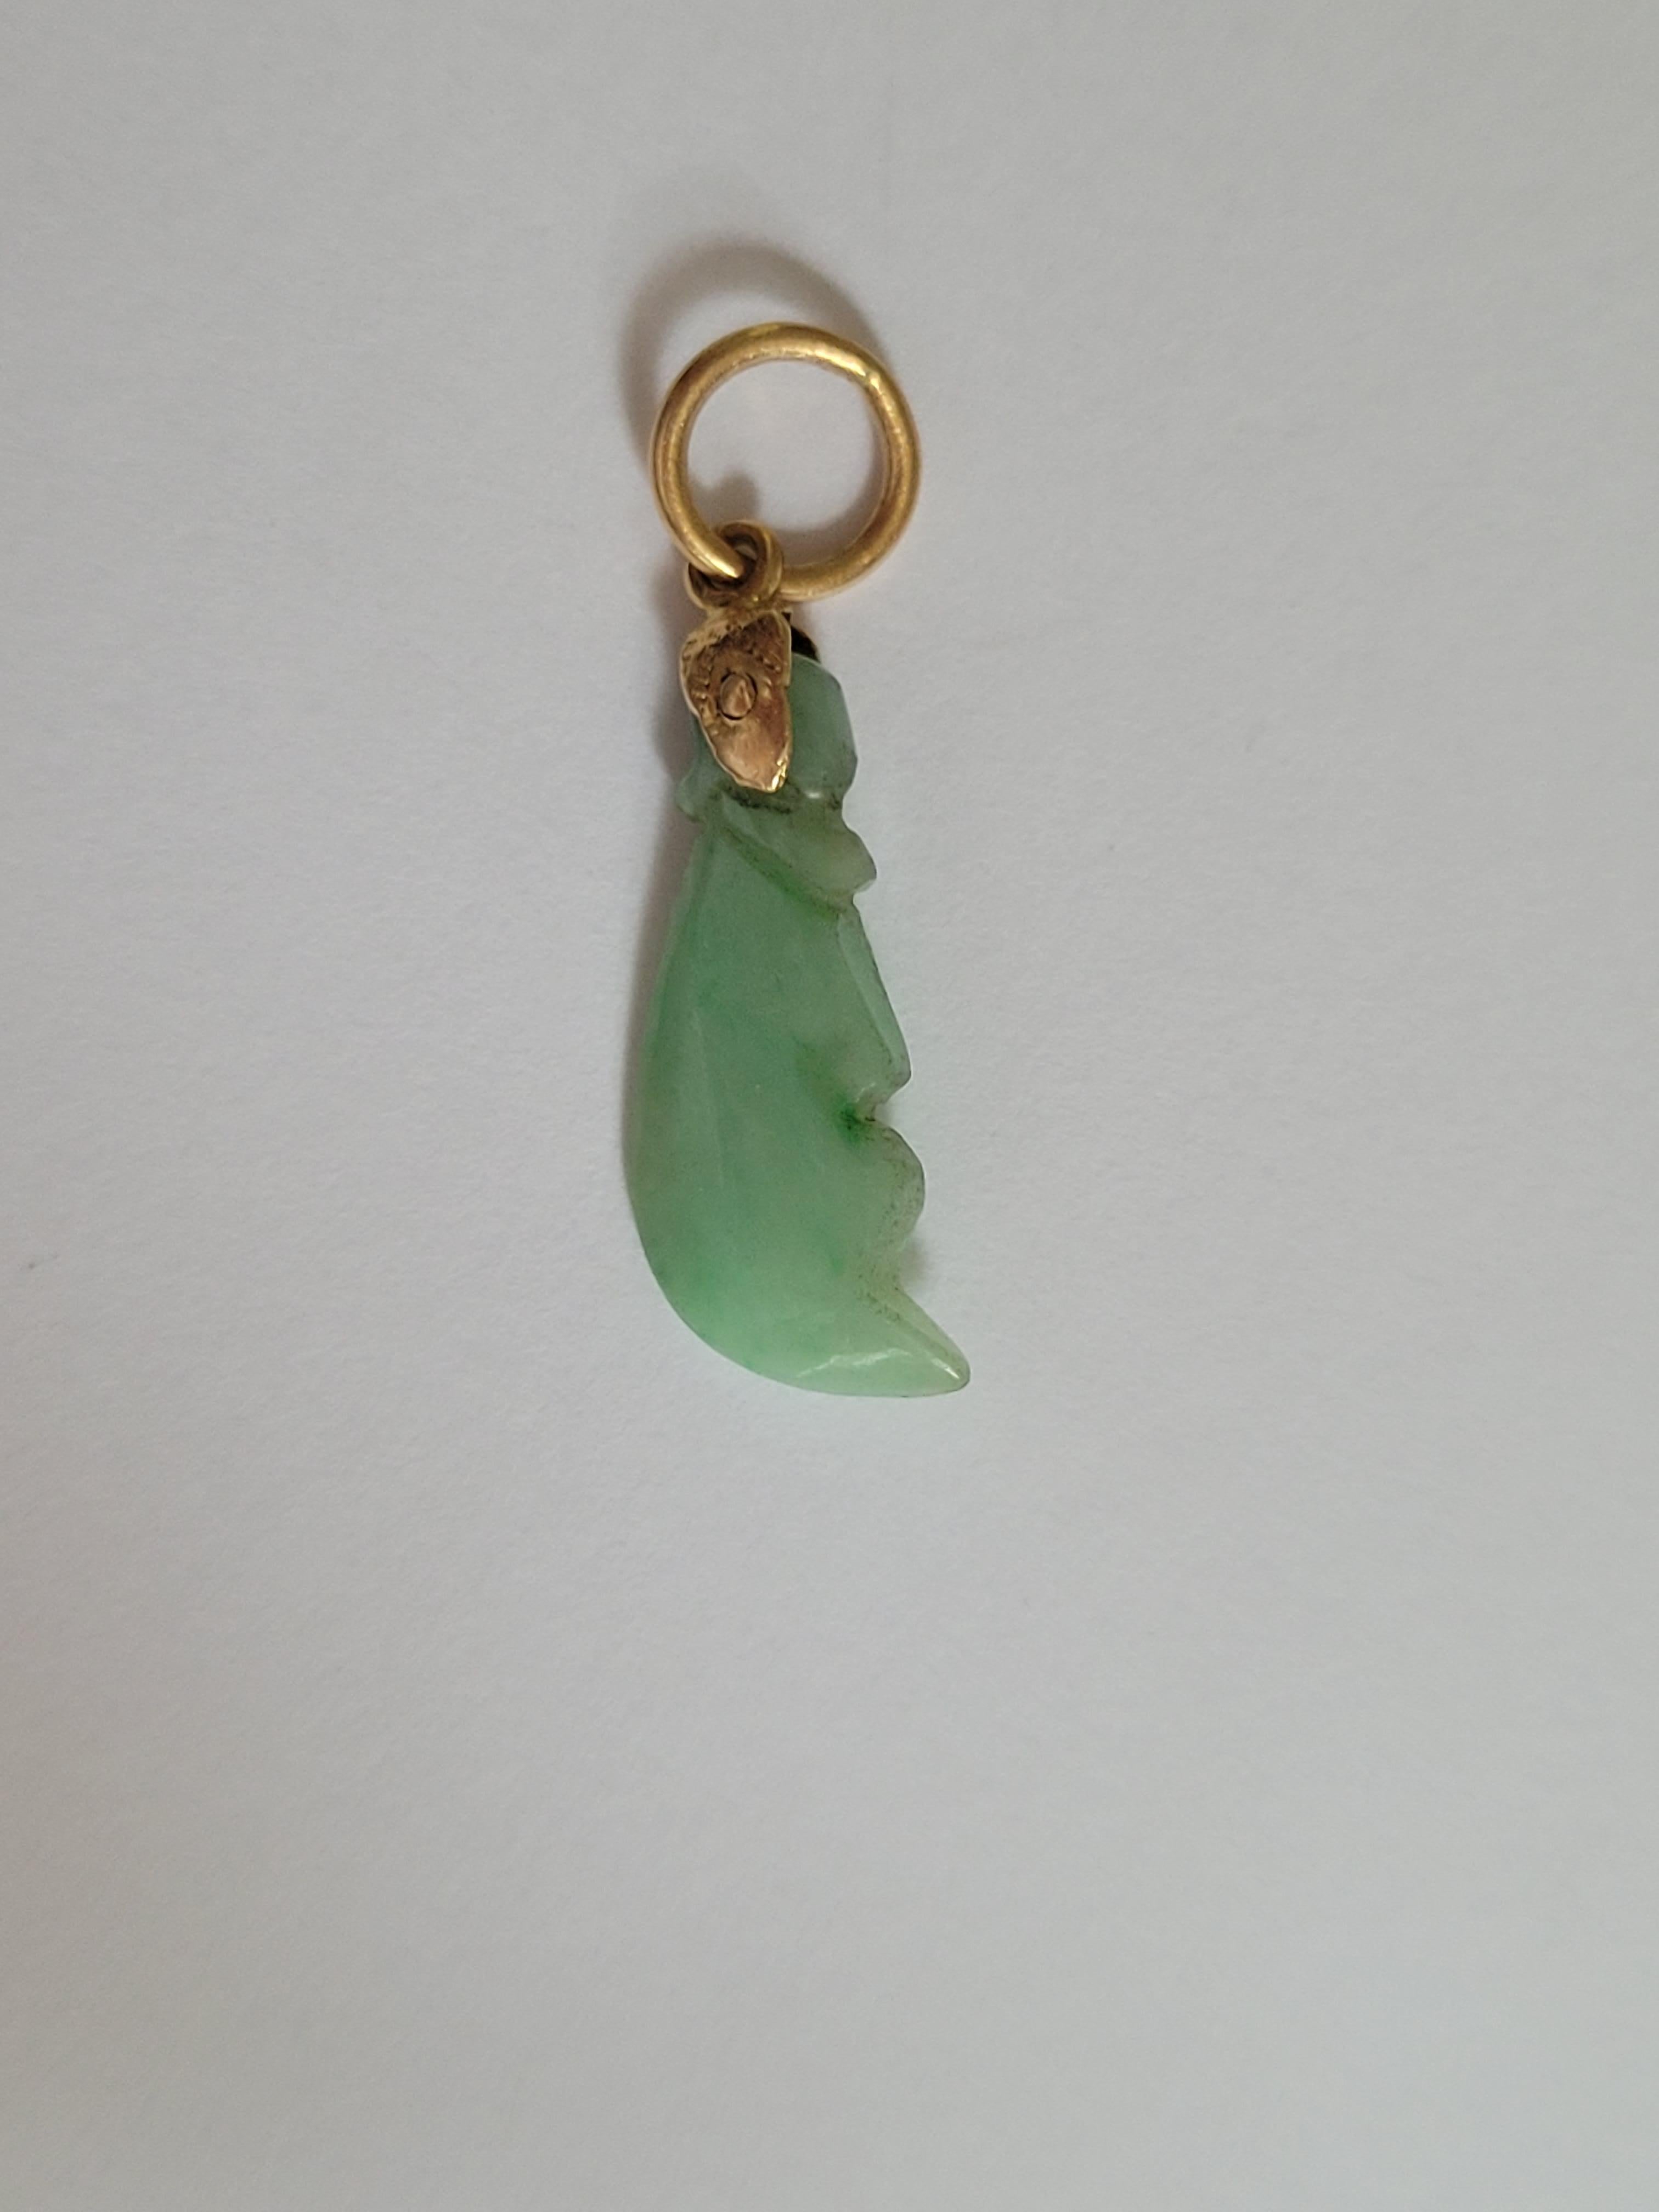 A Lovely Antique early 1900s Yellow Gold and Carved Jade charm pendant. An eye catching piece of jewelry, perfect for adding color to everyday or special occasion outfit. Oriental origin.
Total drop including top rings 27mm, width 9mm.
Weight